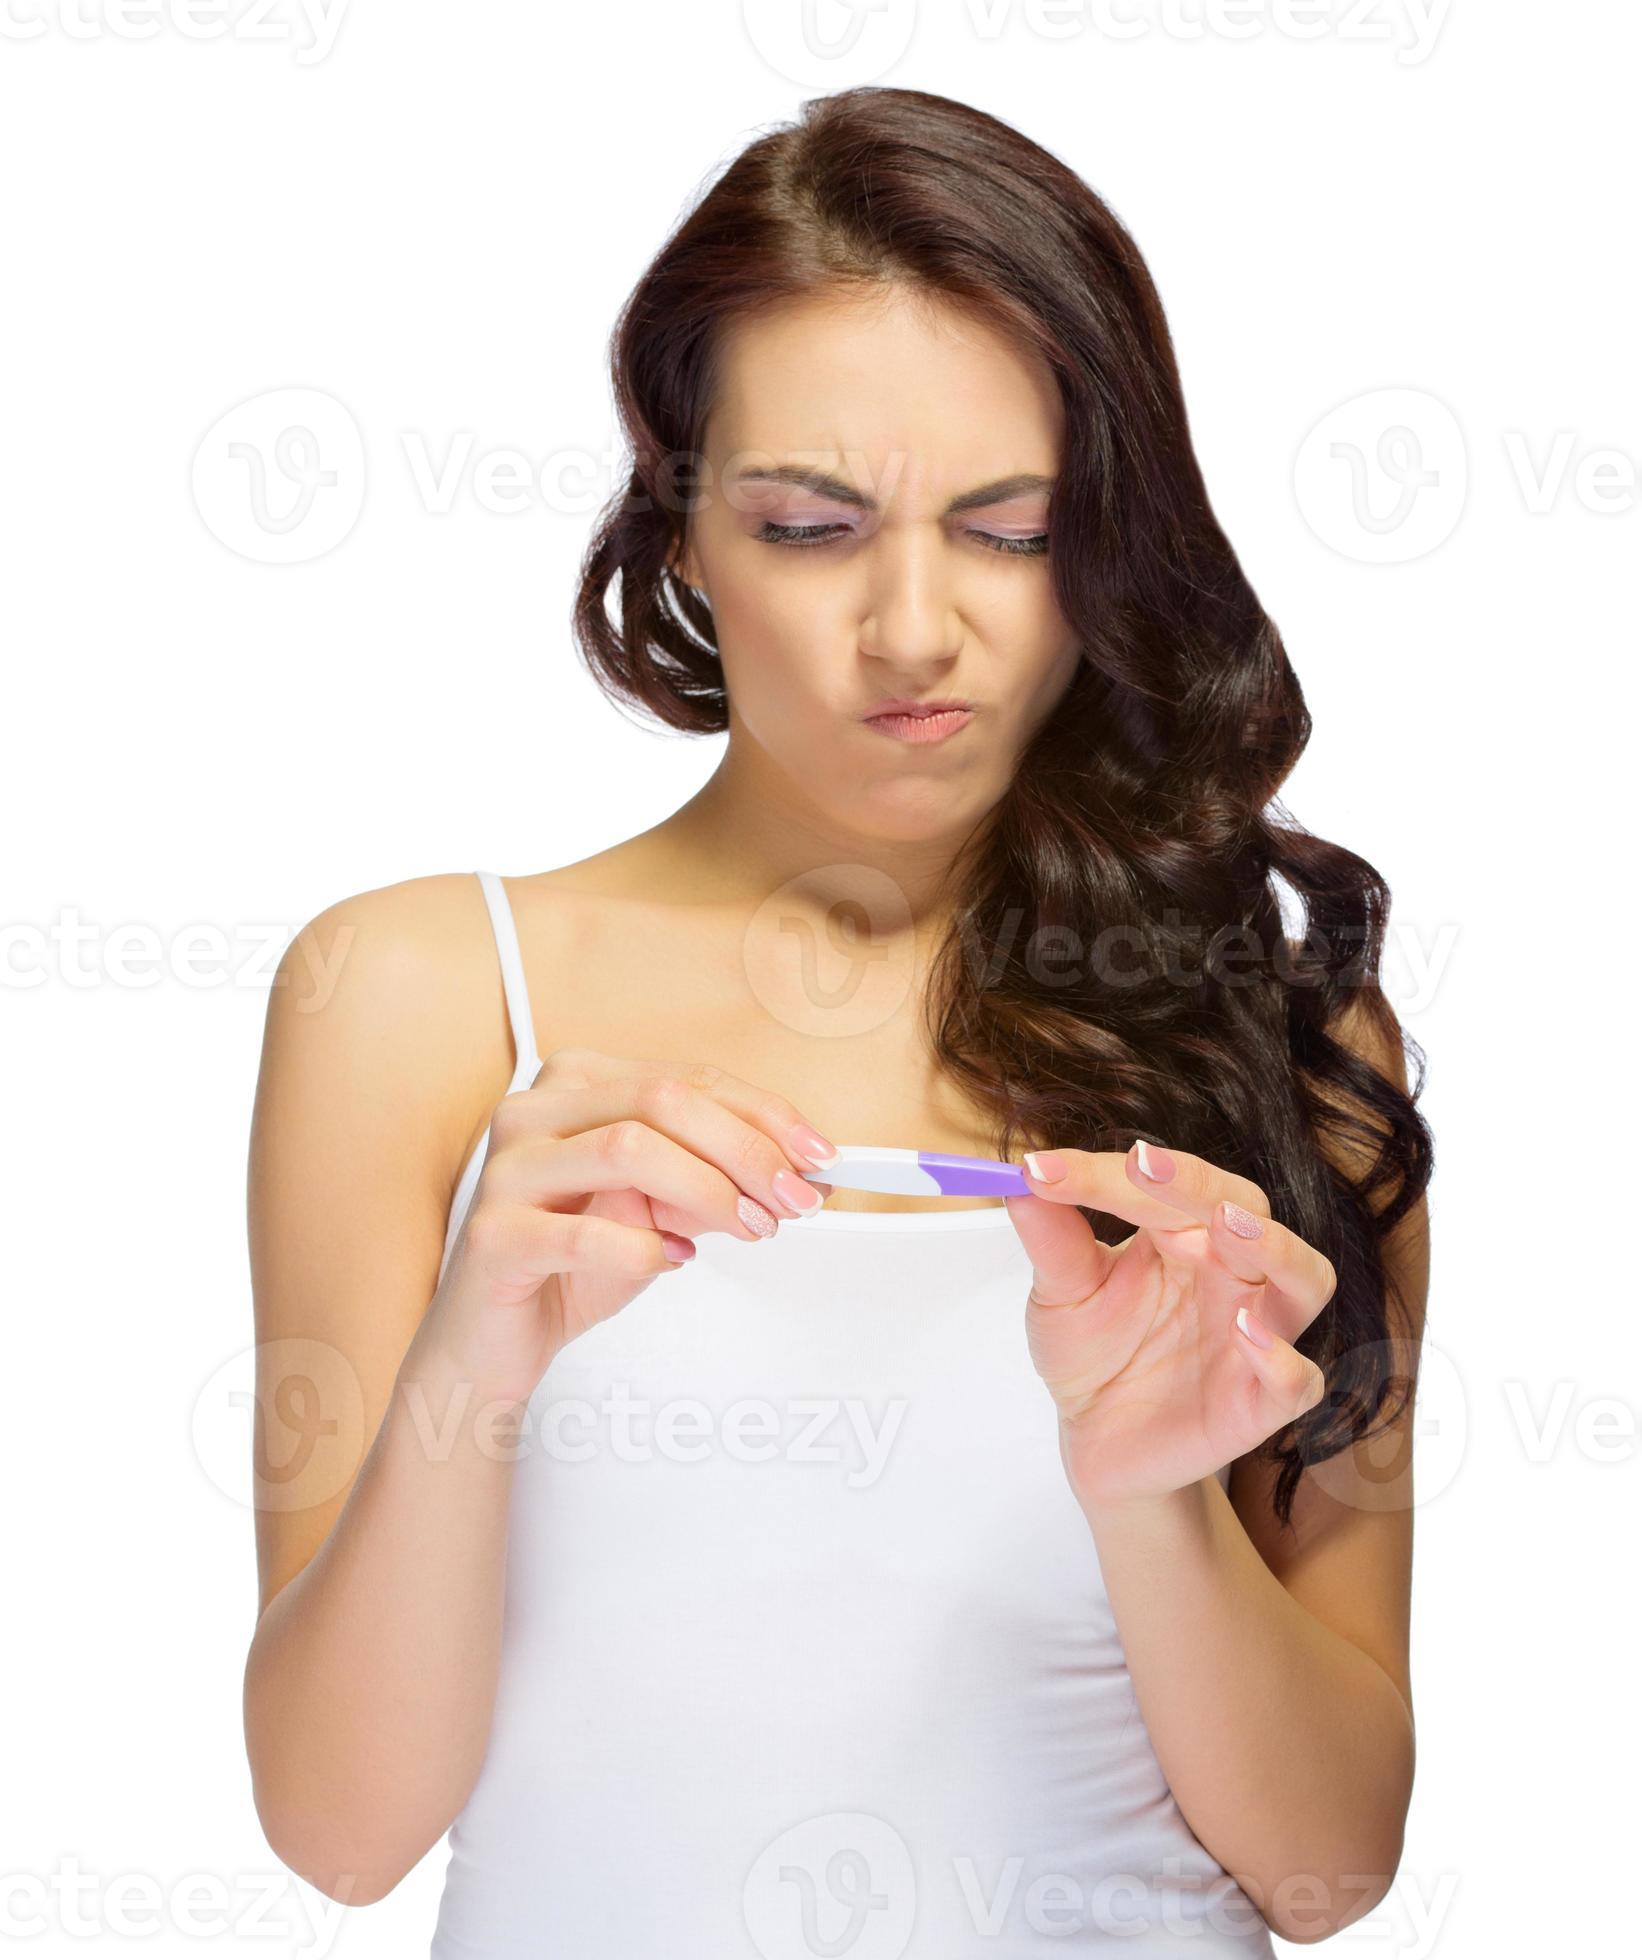 Displeased girl with pregnancy test photo